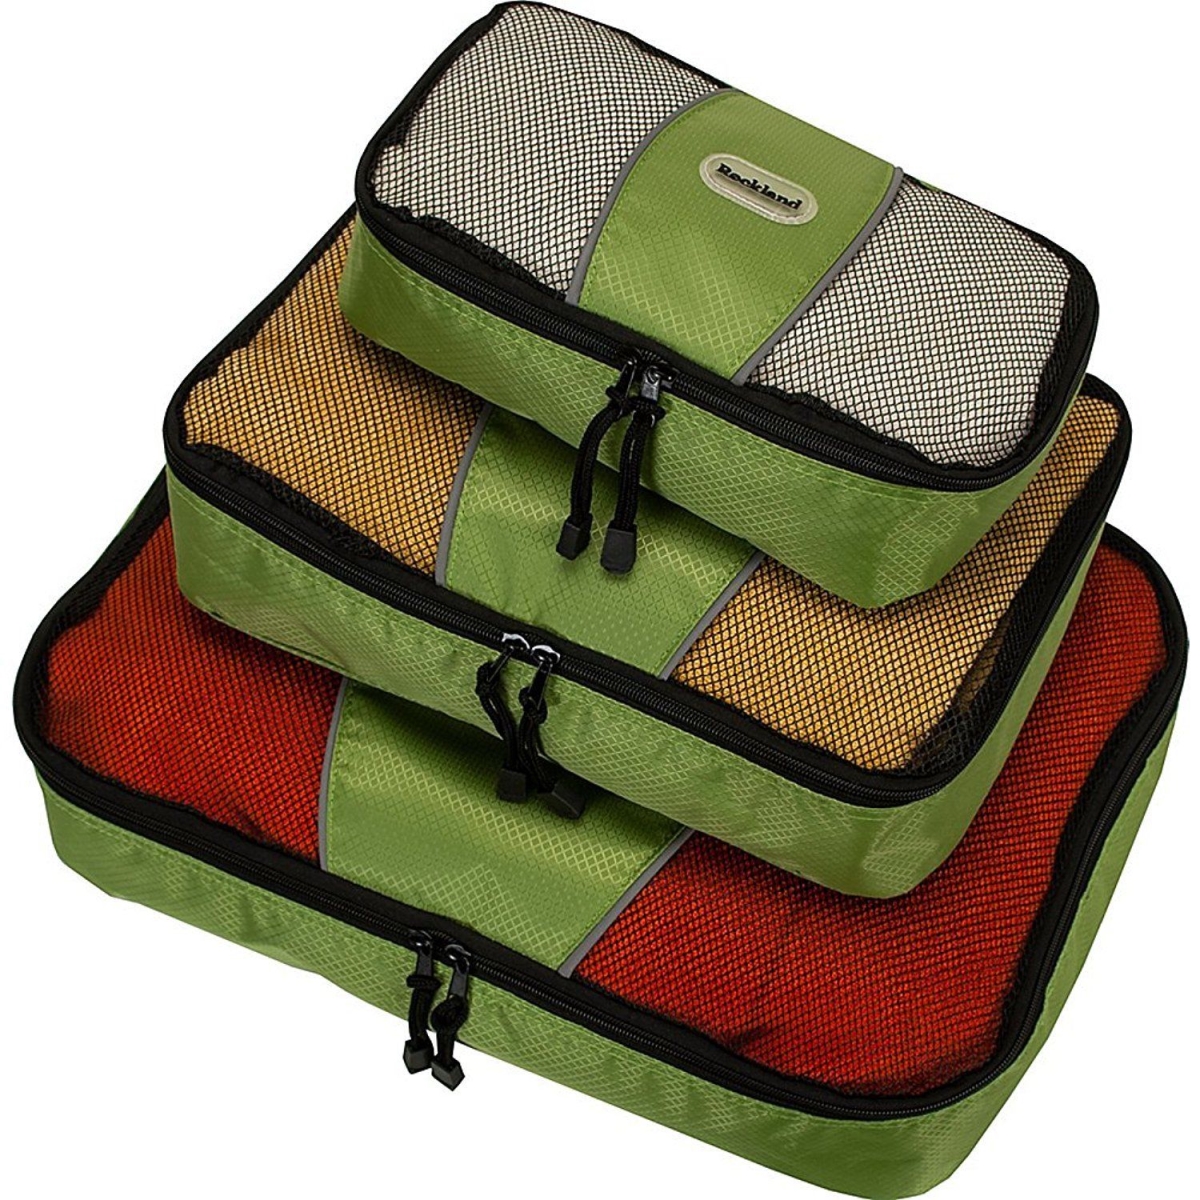 U01-lime Packing Cubes Lime - Set Of 3